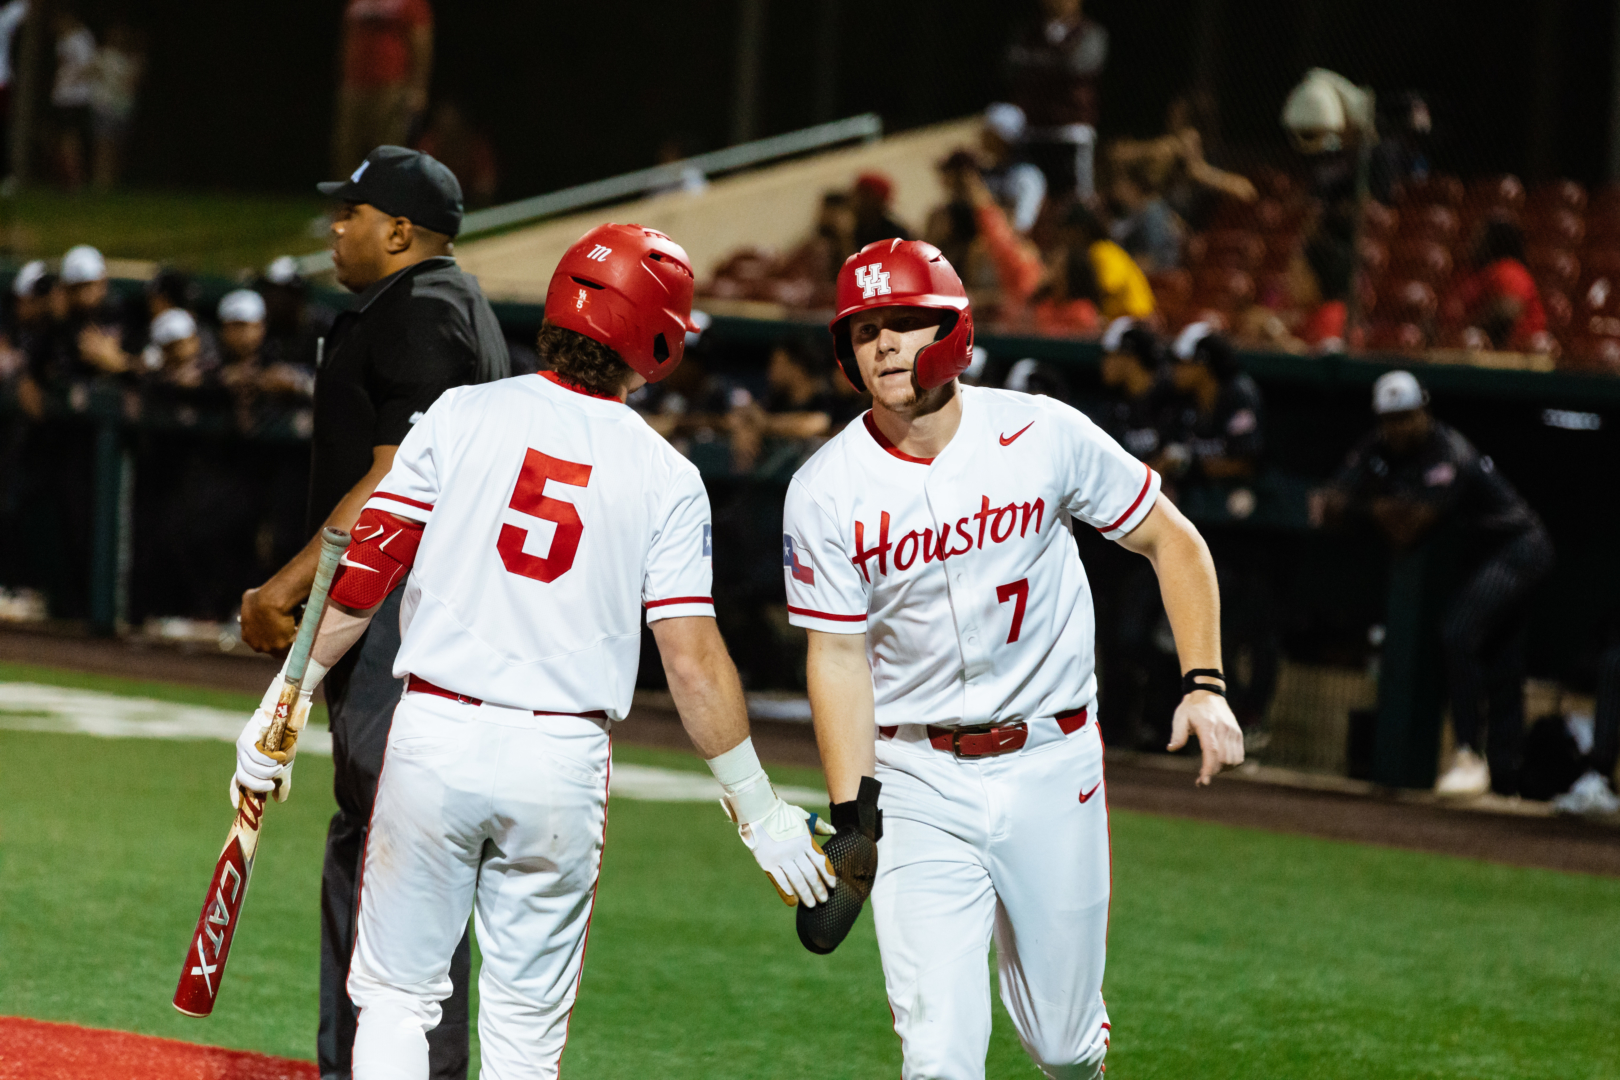 UH baseball third baseman Zach Arnold hit his first home run of the season in the bottom of the first inning in the Cougars' win over Texas Southern on Tuesday night. | Oscar Herrera/The Cougar